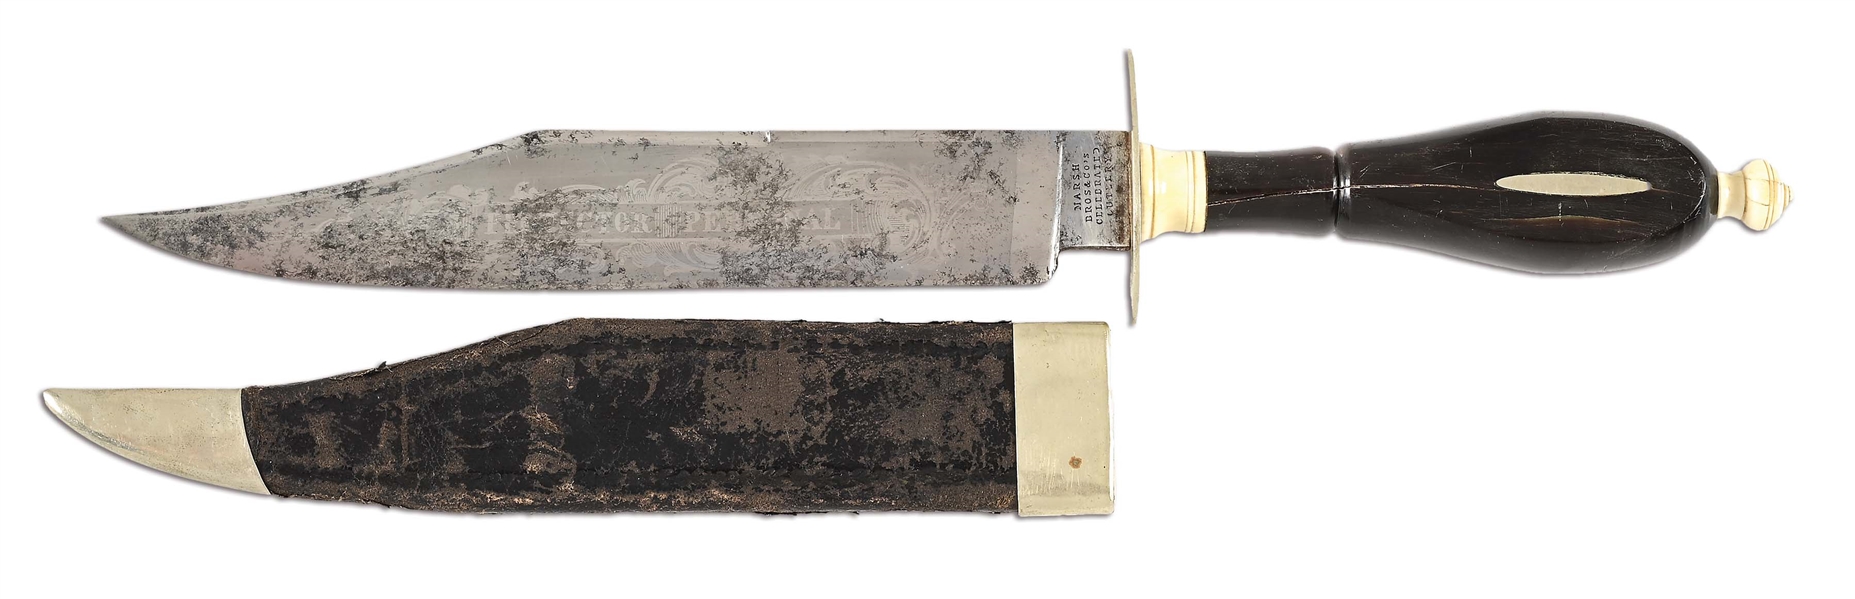 ETCHED BLADE CLIP POINT BOWIE KNIFE BY MARSH BROS., SHEFFIELD.